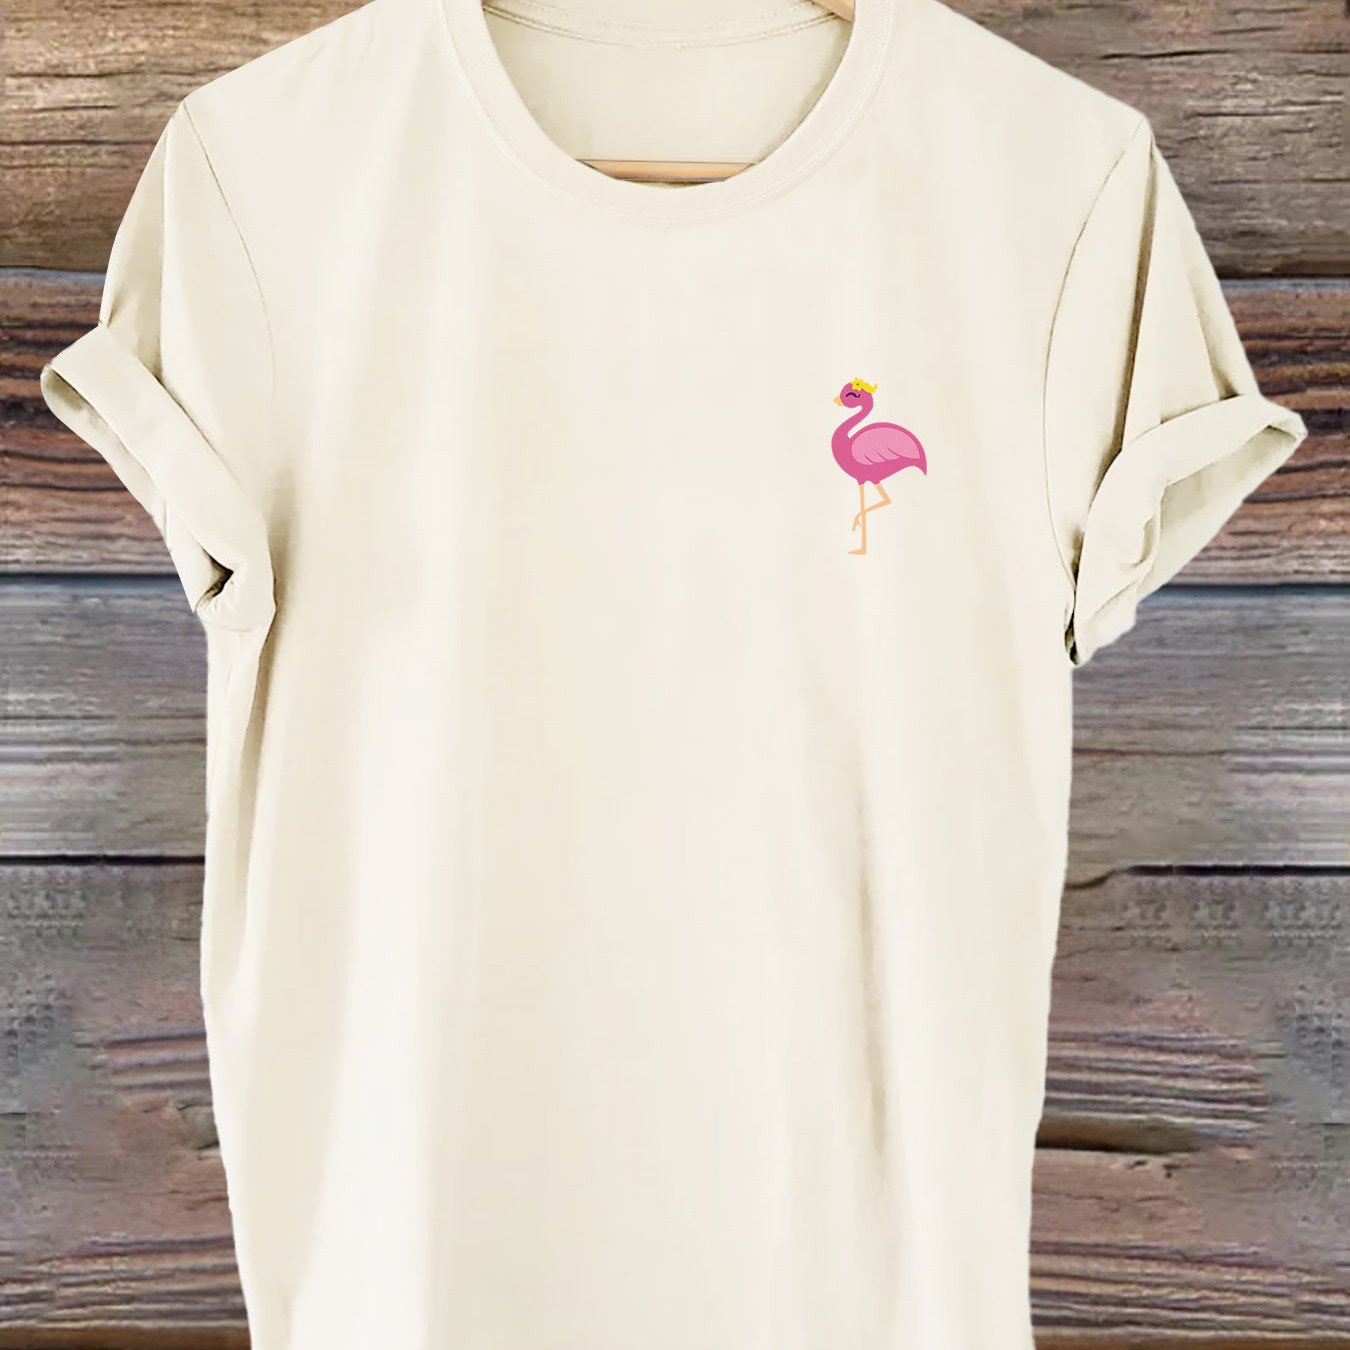 

Flamingo Print T-shirt, Short Sleeve Crew Neck Casual Top For Summer & Spring, Women's Clothing